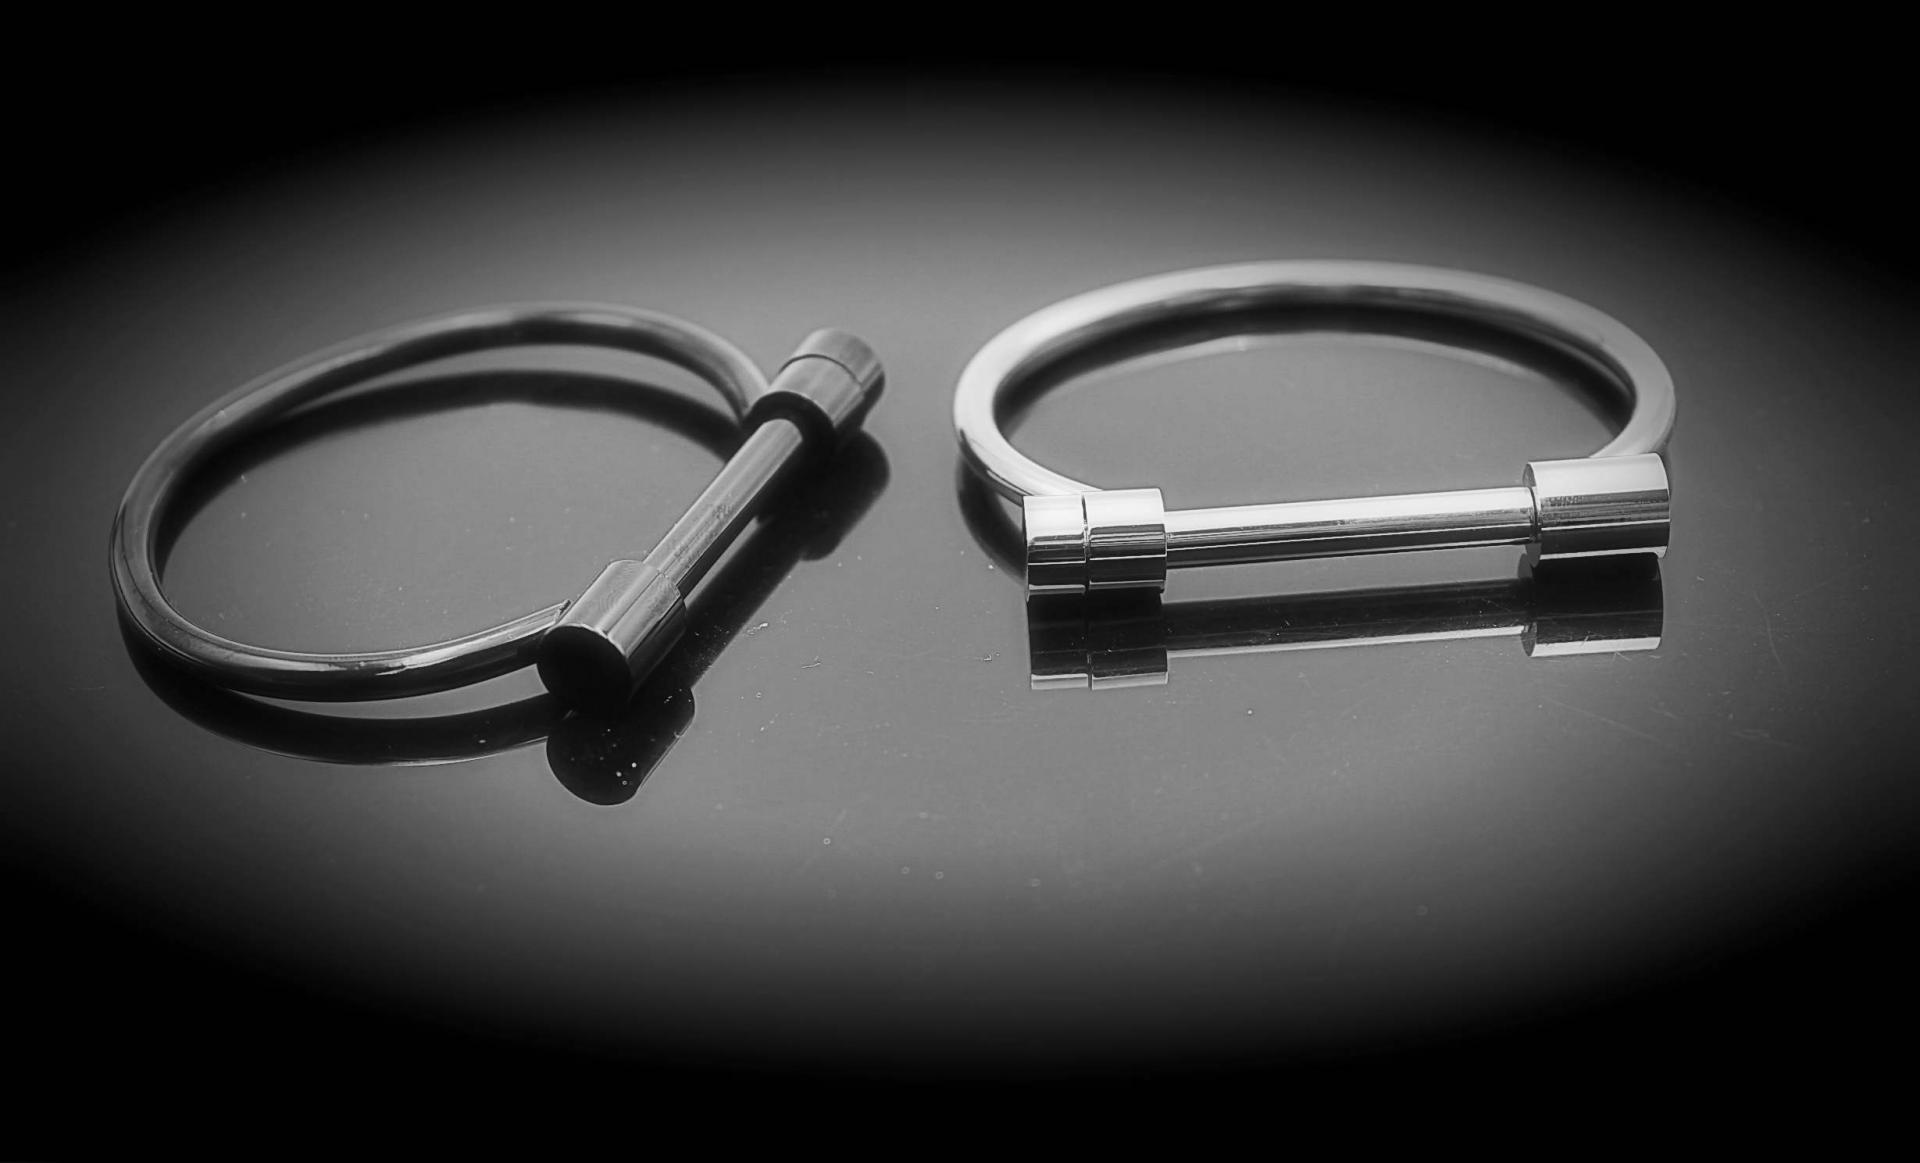 Shackle Bangle Stainless Steel